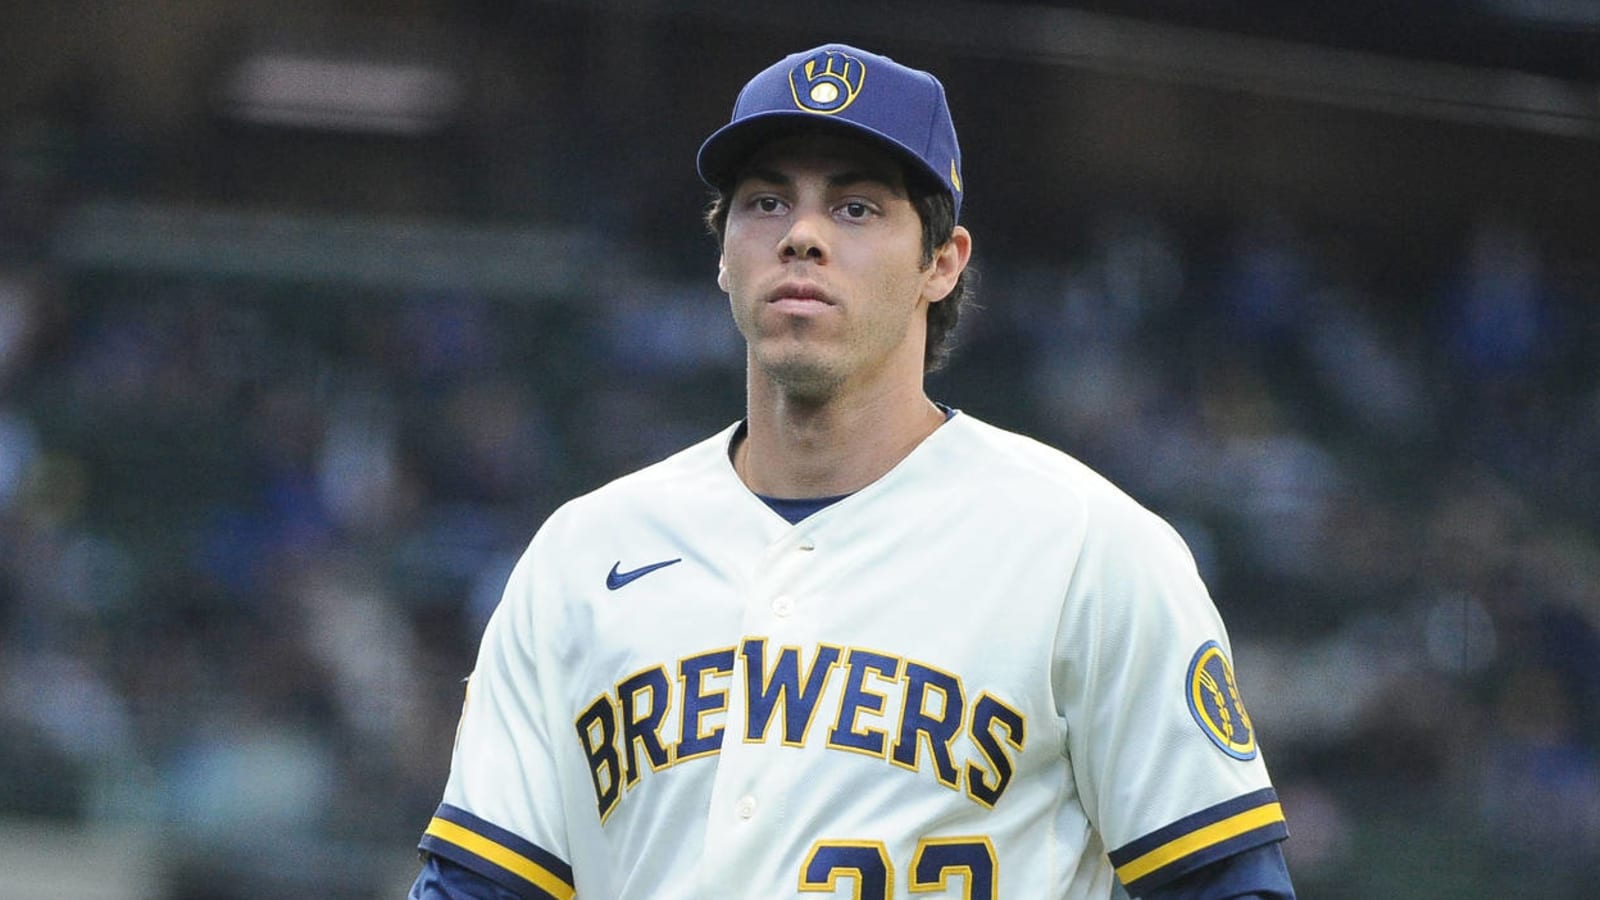 Brewers star Christian Yelich to undergo MRI for back injury